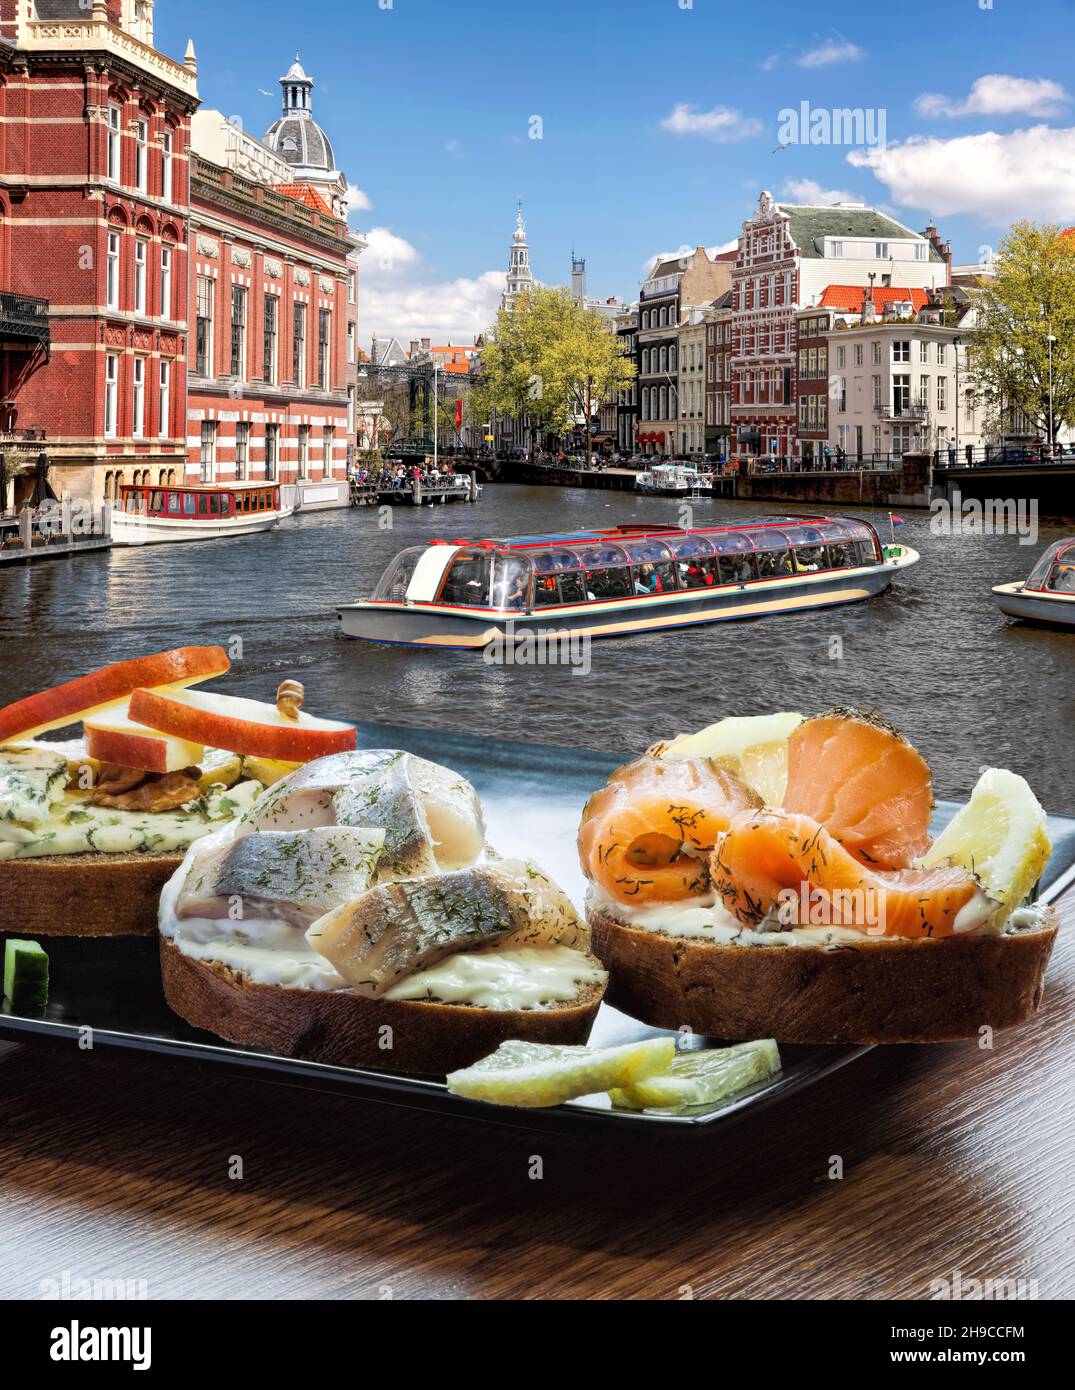 Amsterdam city with fishplate (salomon and codfish sandwiches) against  tourboat on canal in Netherlands Stock Photo - Alamy